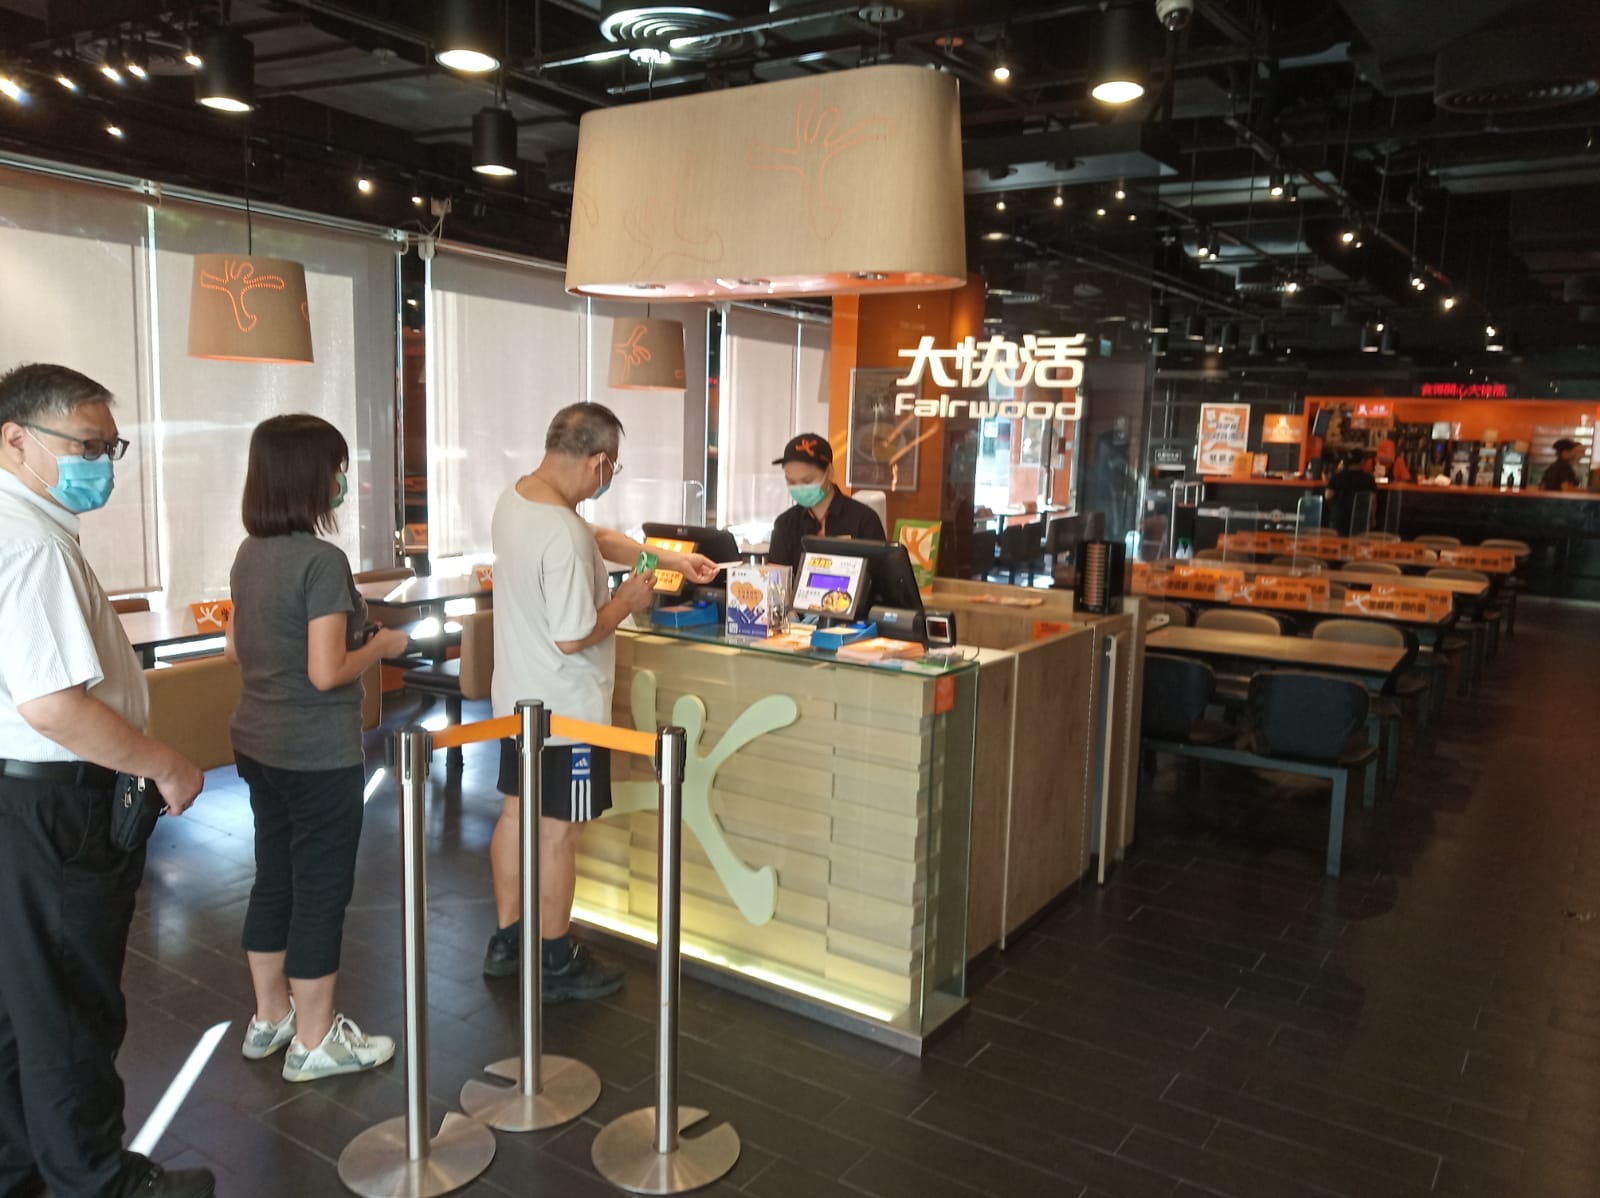 Customers order food to go at Fairwood in San Po Kong on July 29, 2020. Photo via Coconuts Media